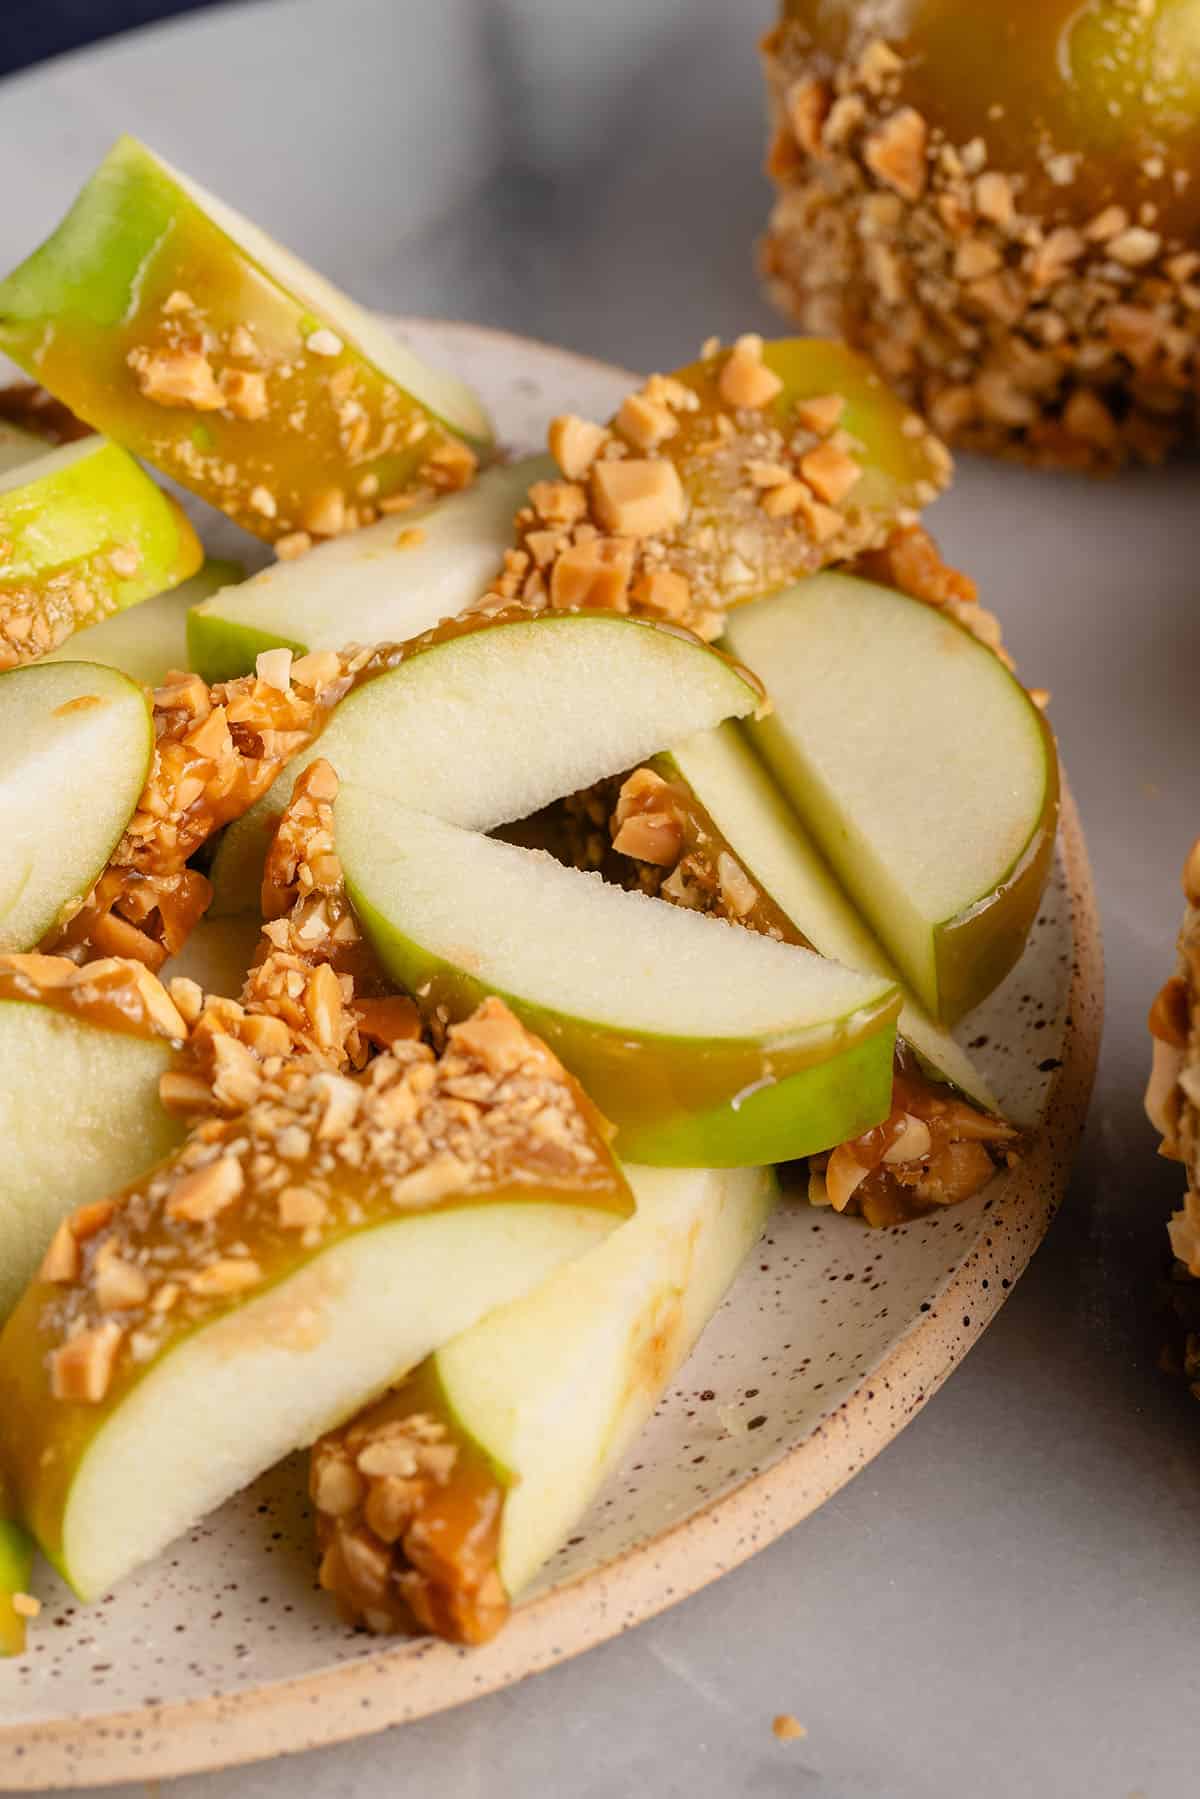 sliced caramel apple with peanuts on white plate